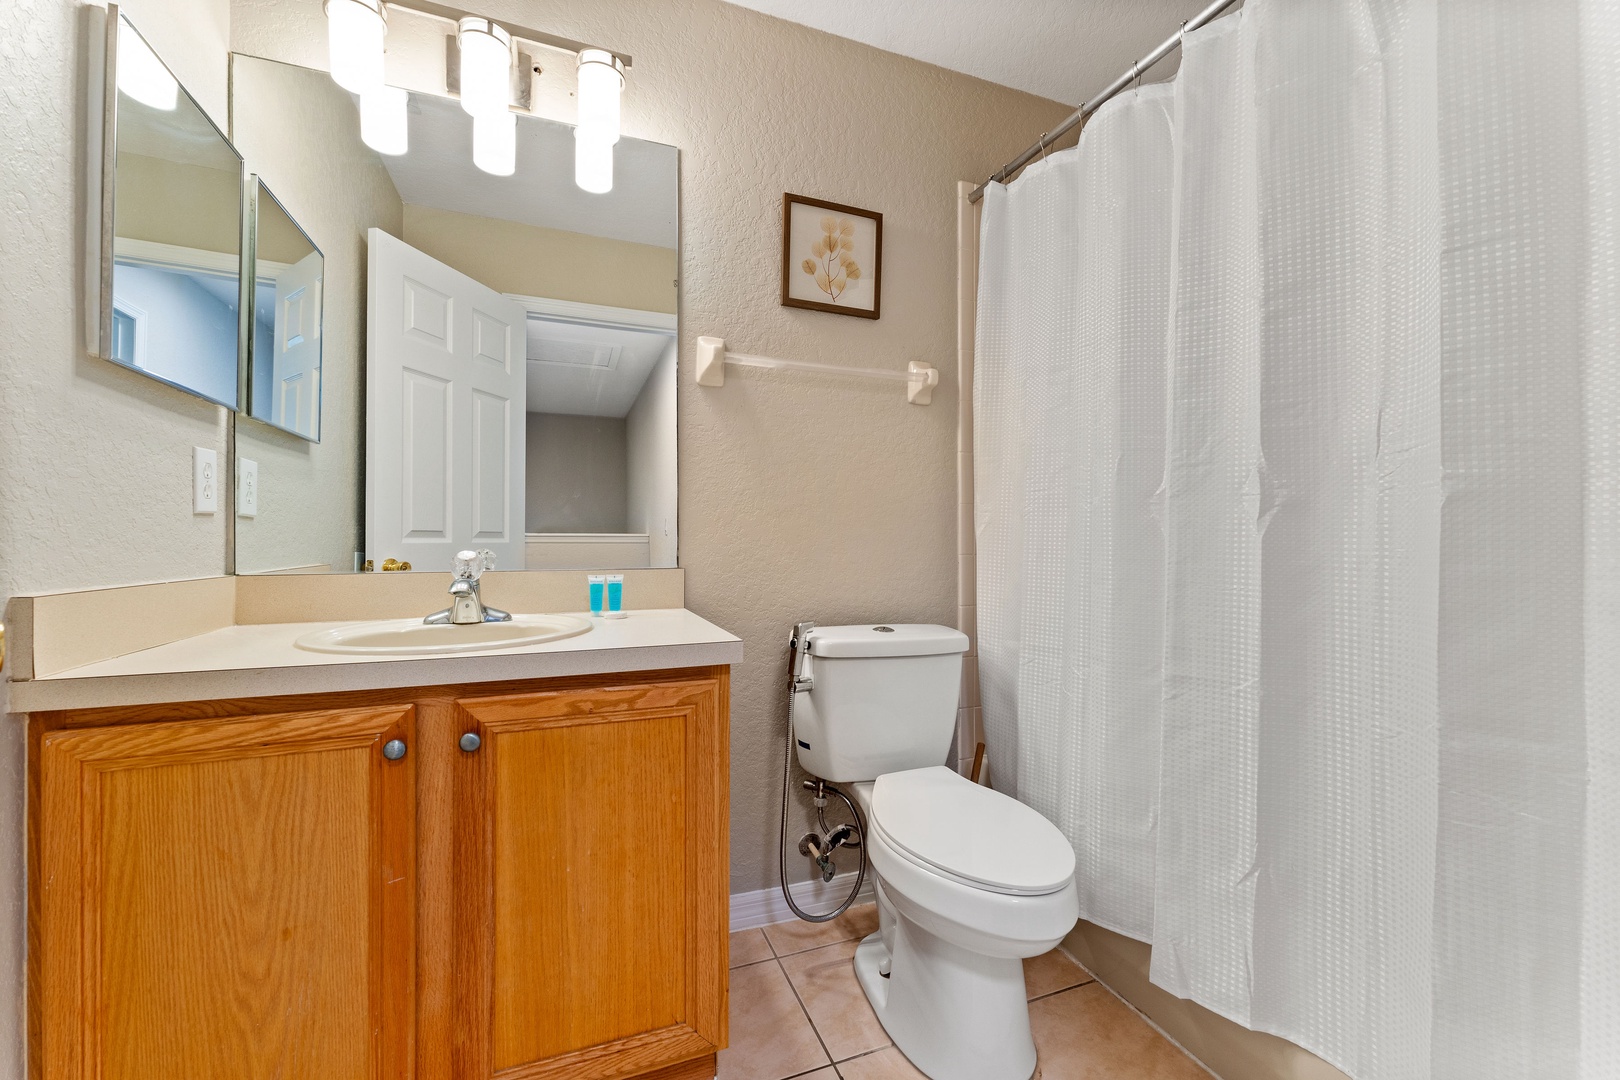 This 2nd floor hall bathroom includes a single vanity & shower/tub combo